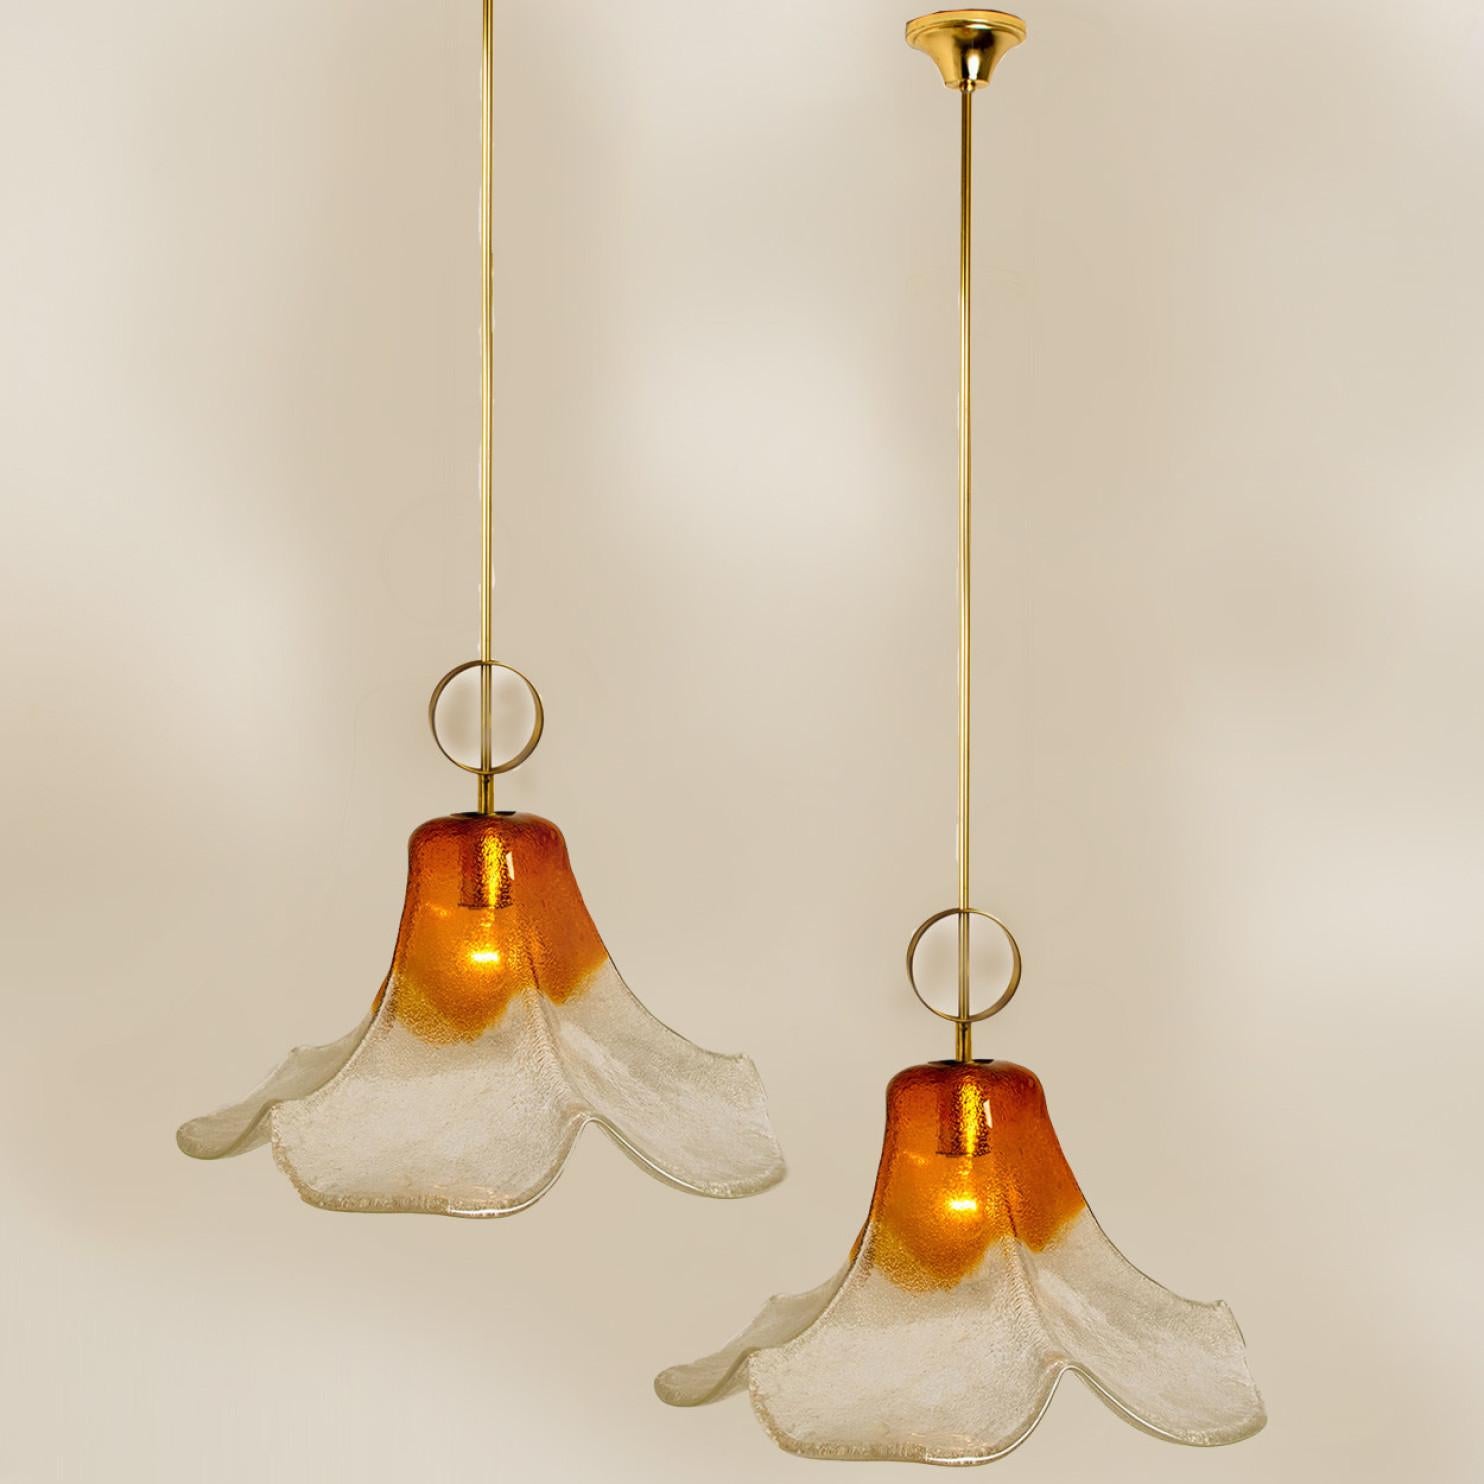 Pair of Pendant Lamps Model LS185 by Carlo Nason for Mazzega 1